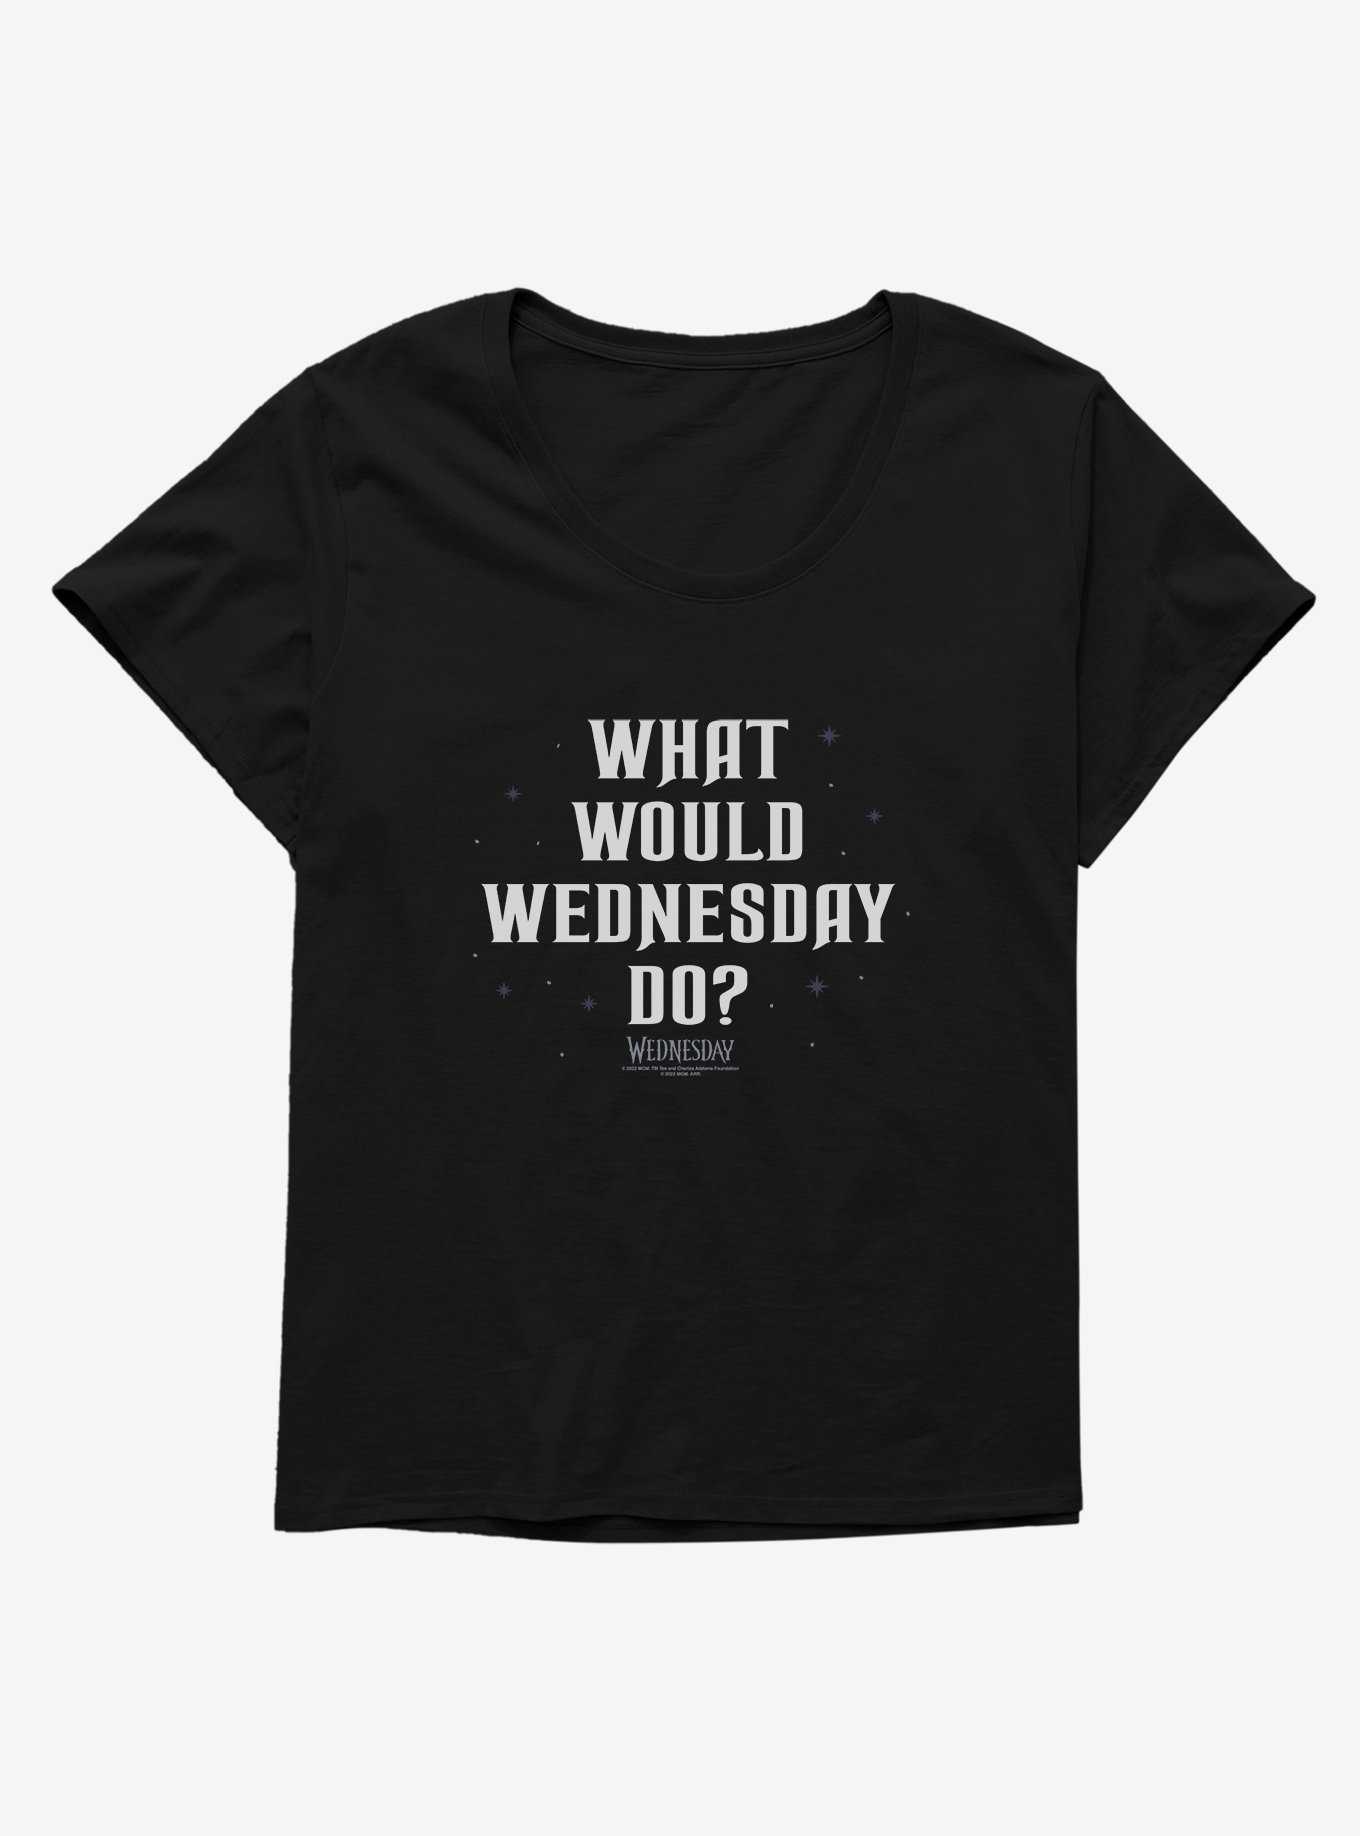 Wednesday What Would Wednesday Do? Womens T-Shirt Plus Size, , hi-res